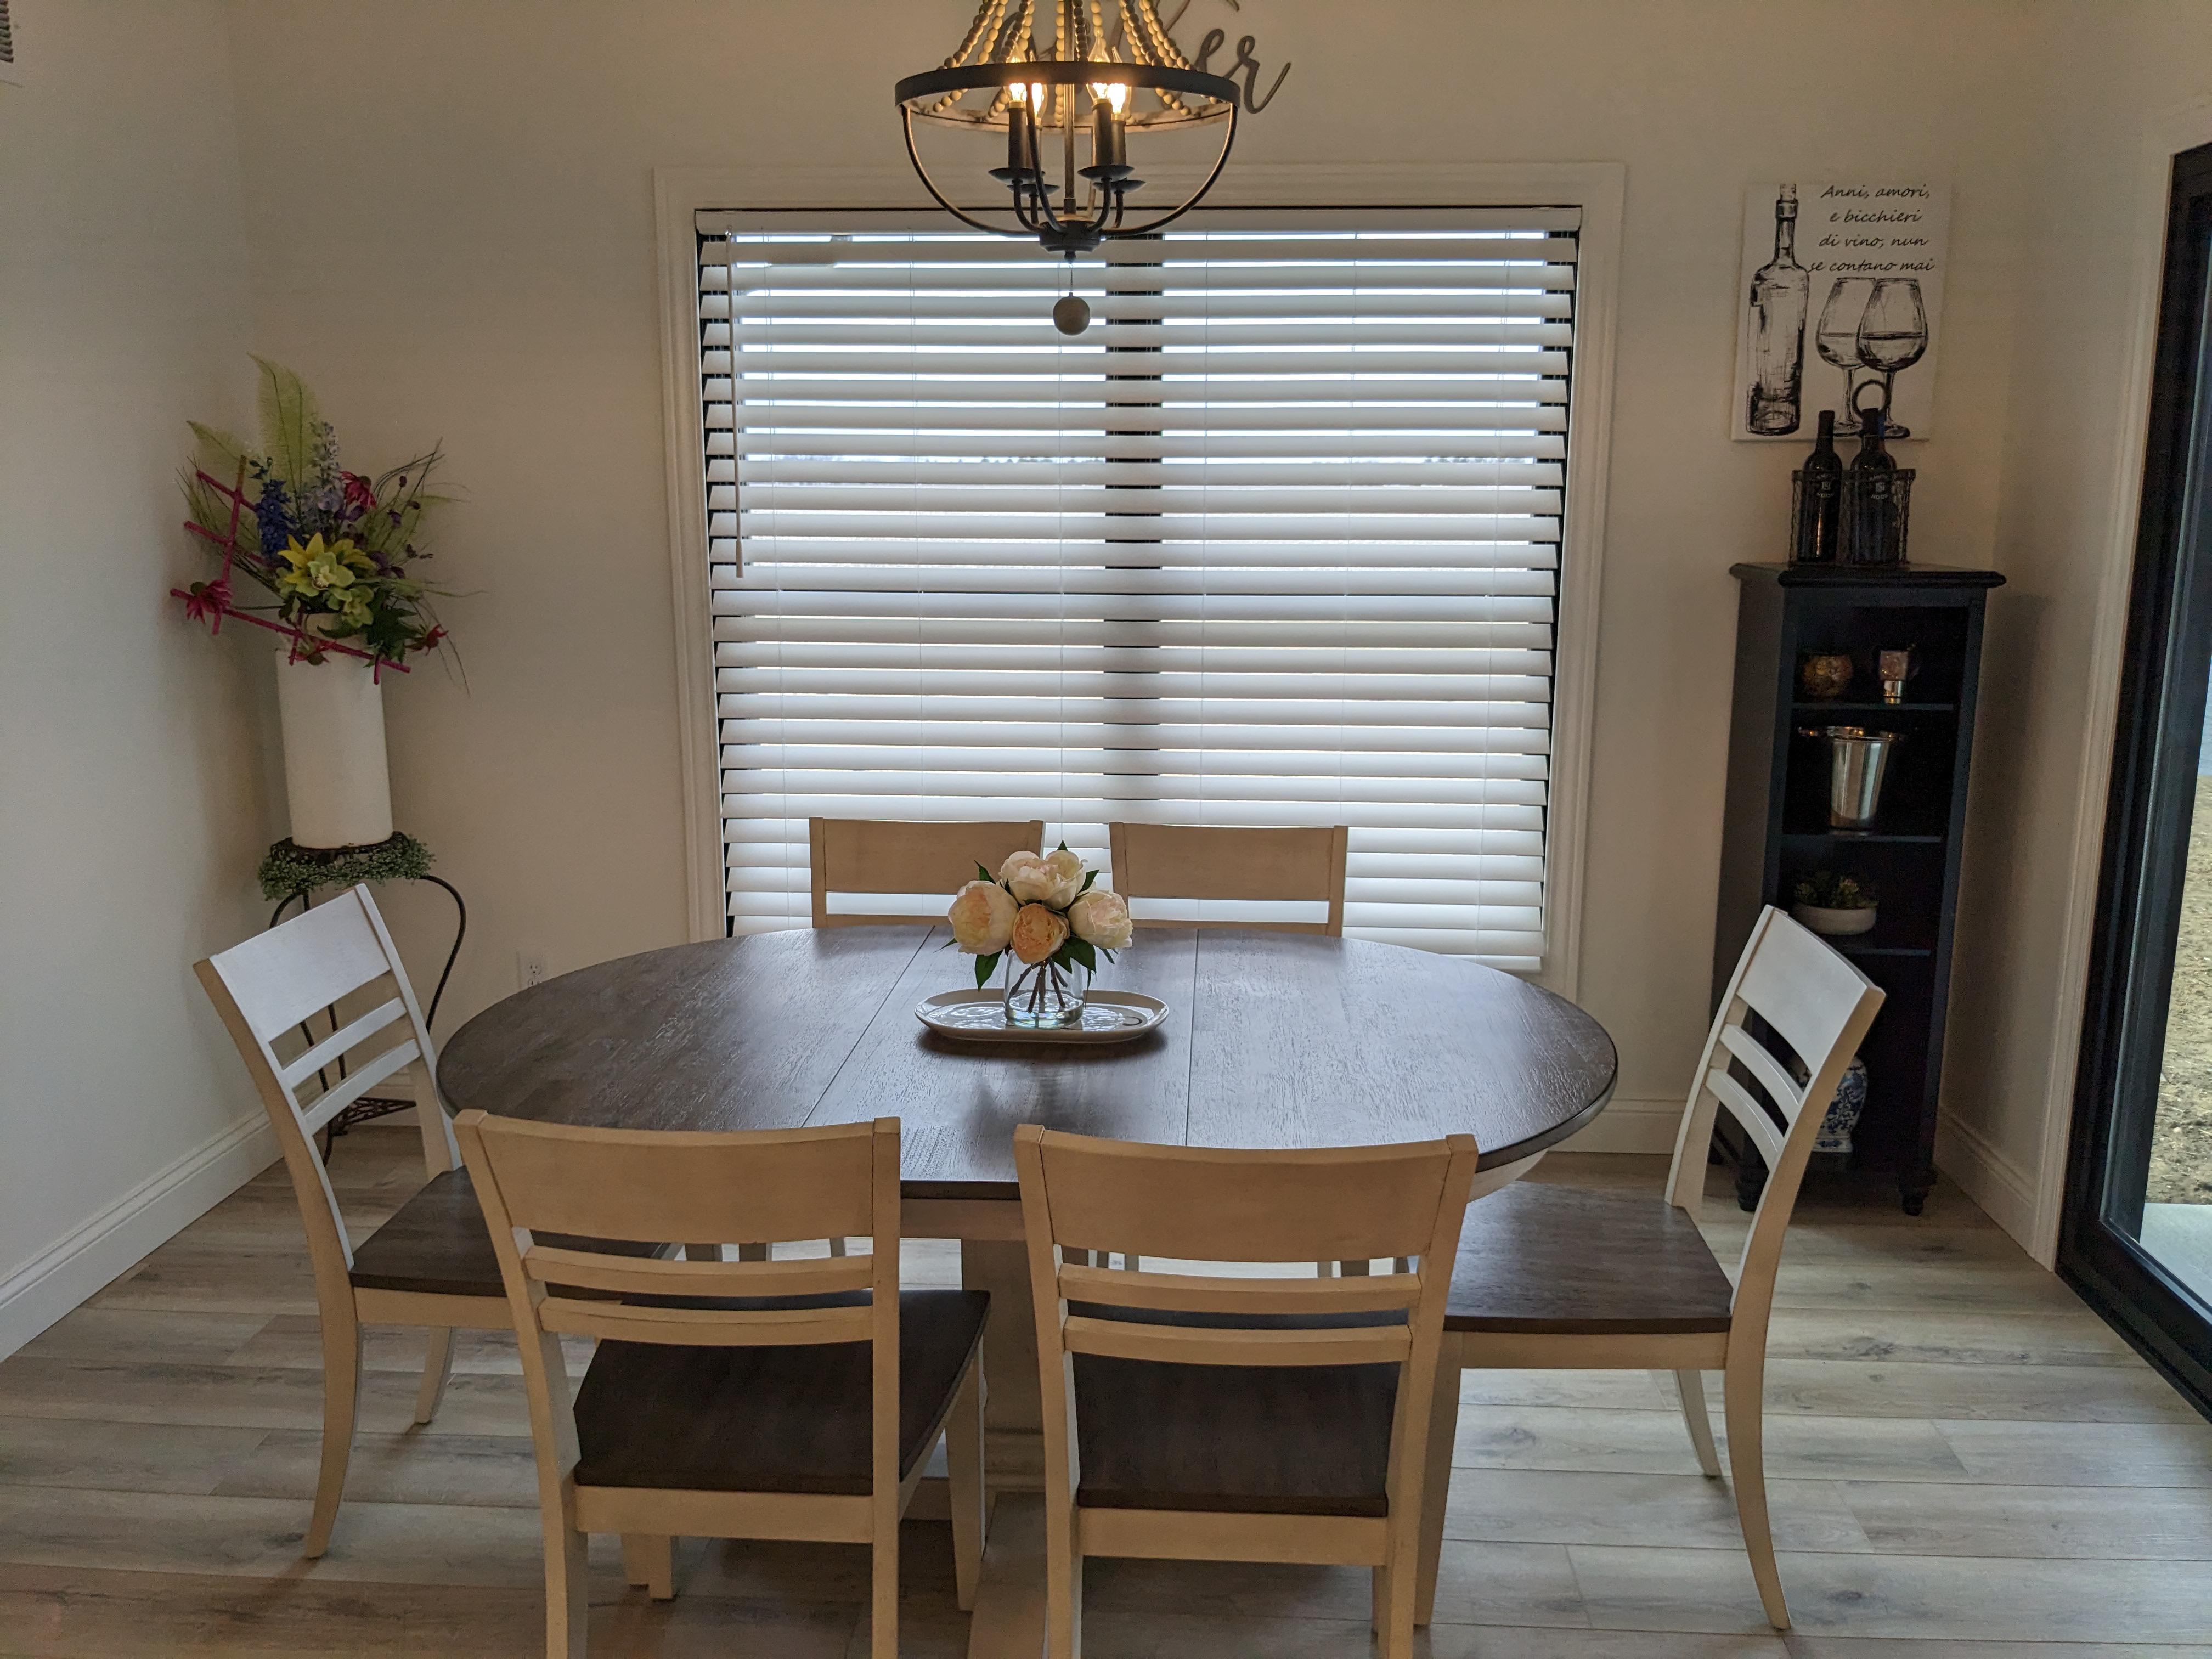 Cordless white faux wood blinds in Springfield Illinois dining room.  BudgetBlinds  WindowCoverings  Blinds  SpringfieldIllinois